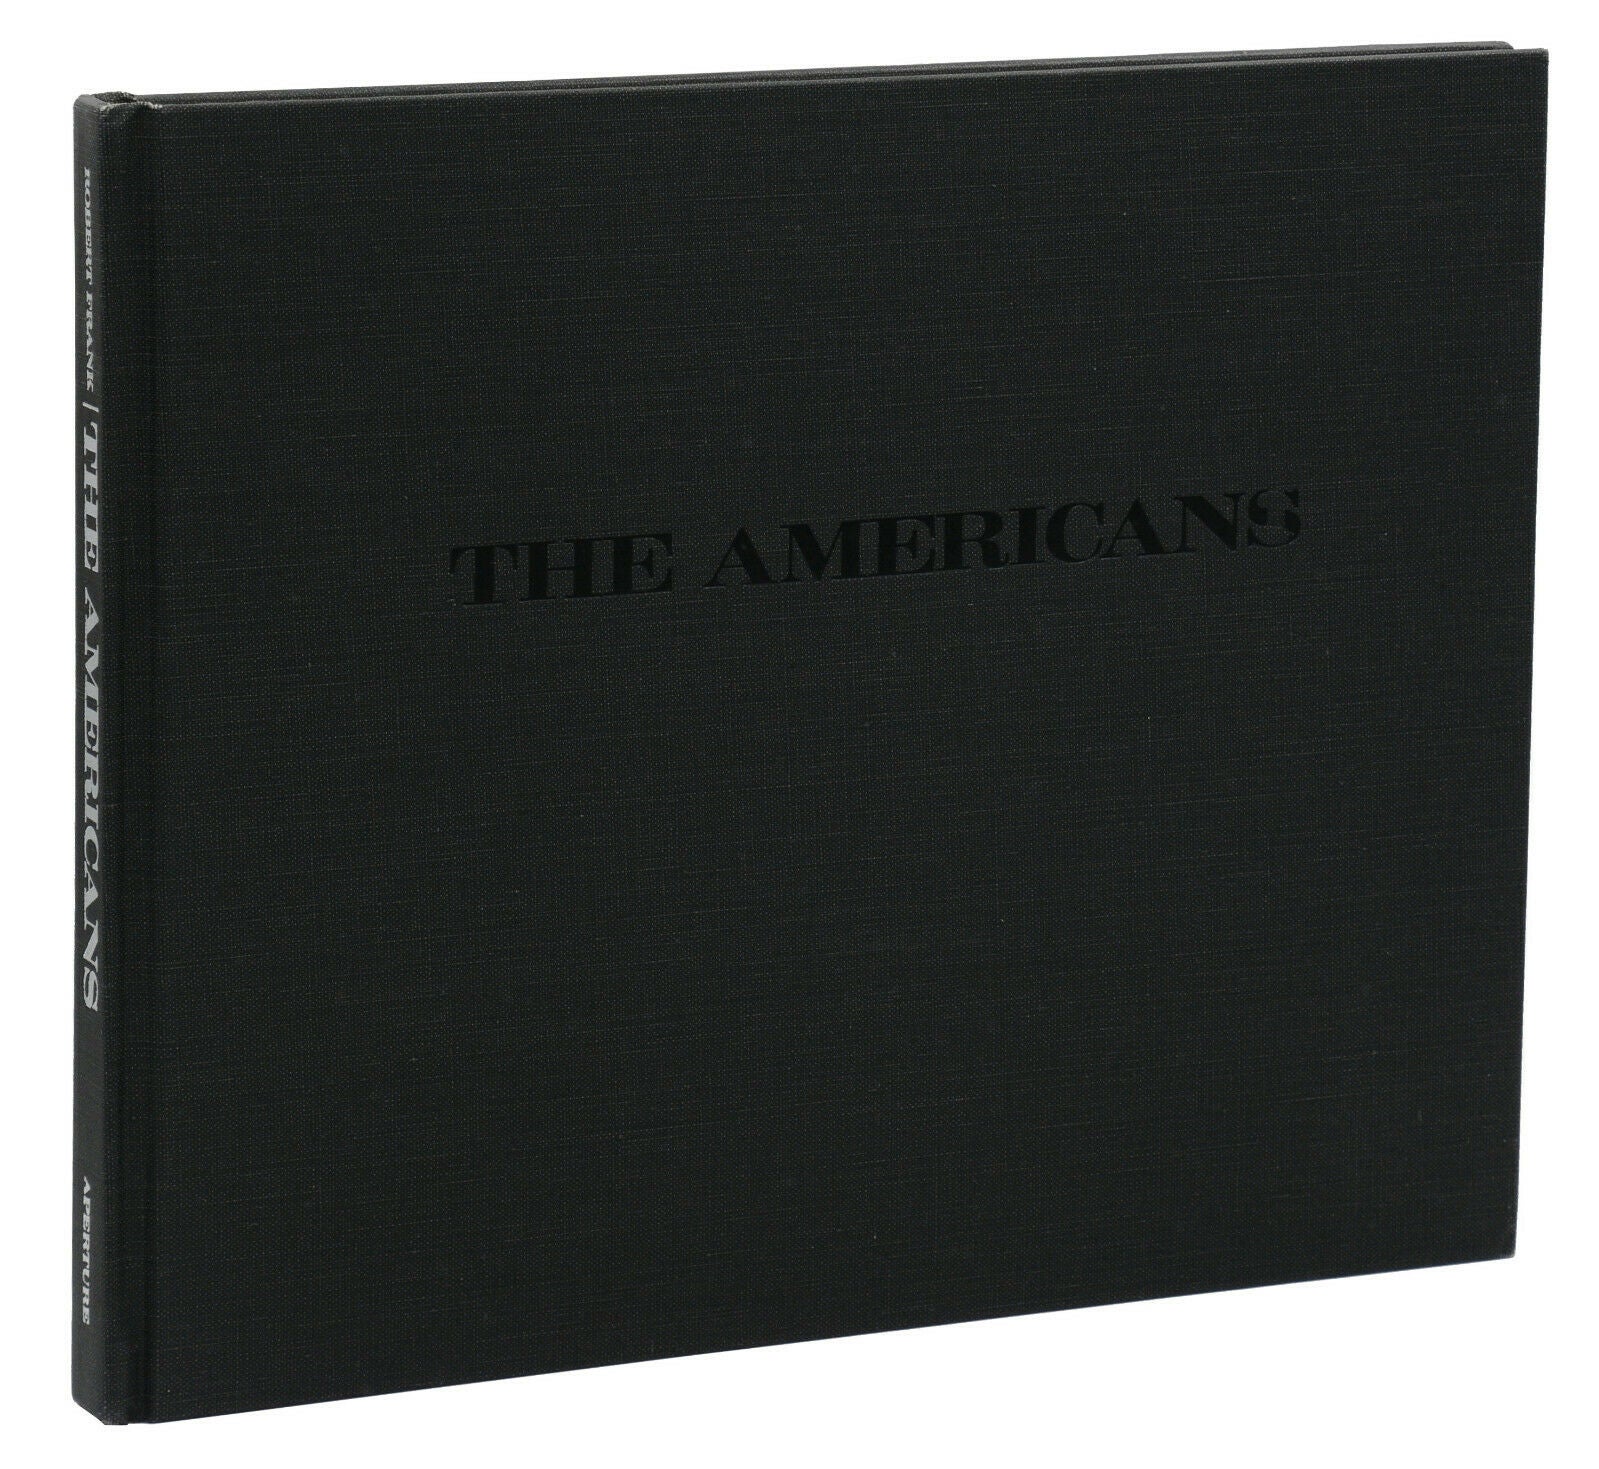 The Americans by Robert Frank, Jack Kerouac, Photographer, Introduction on  Burnside Rare Books